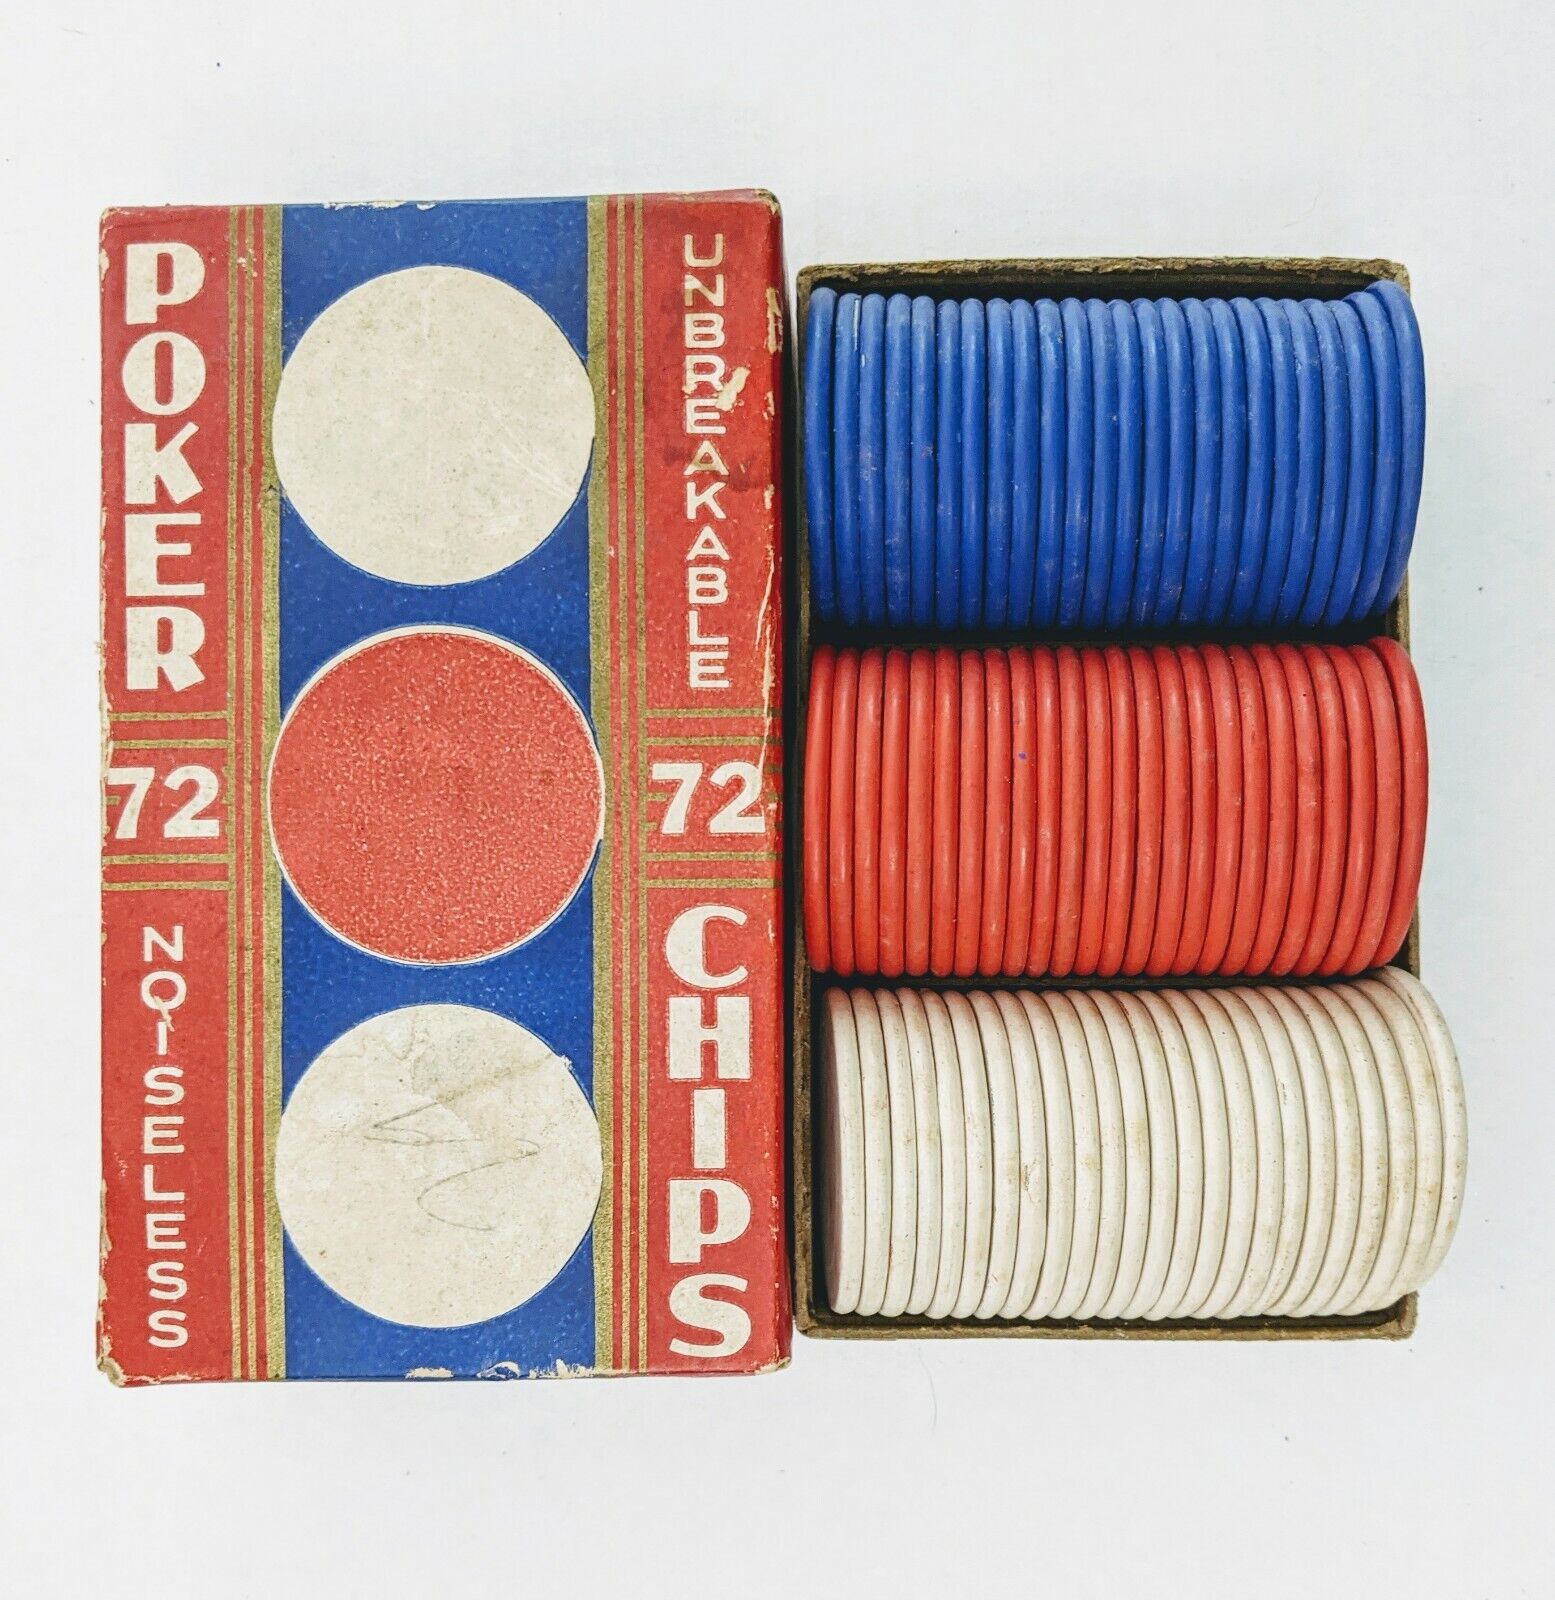 Vintage 1920-30s Red White Blue Assorted Unbreakable Noisless Poker Chips In Box